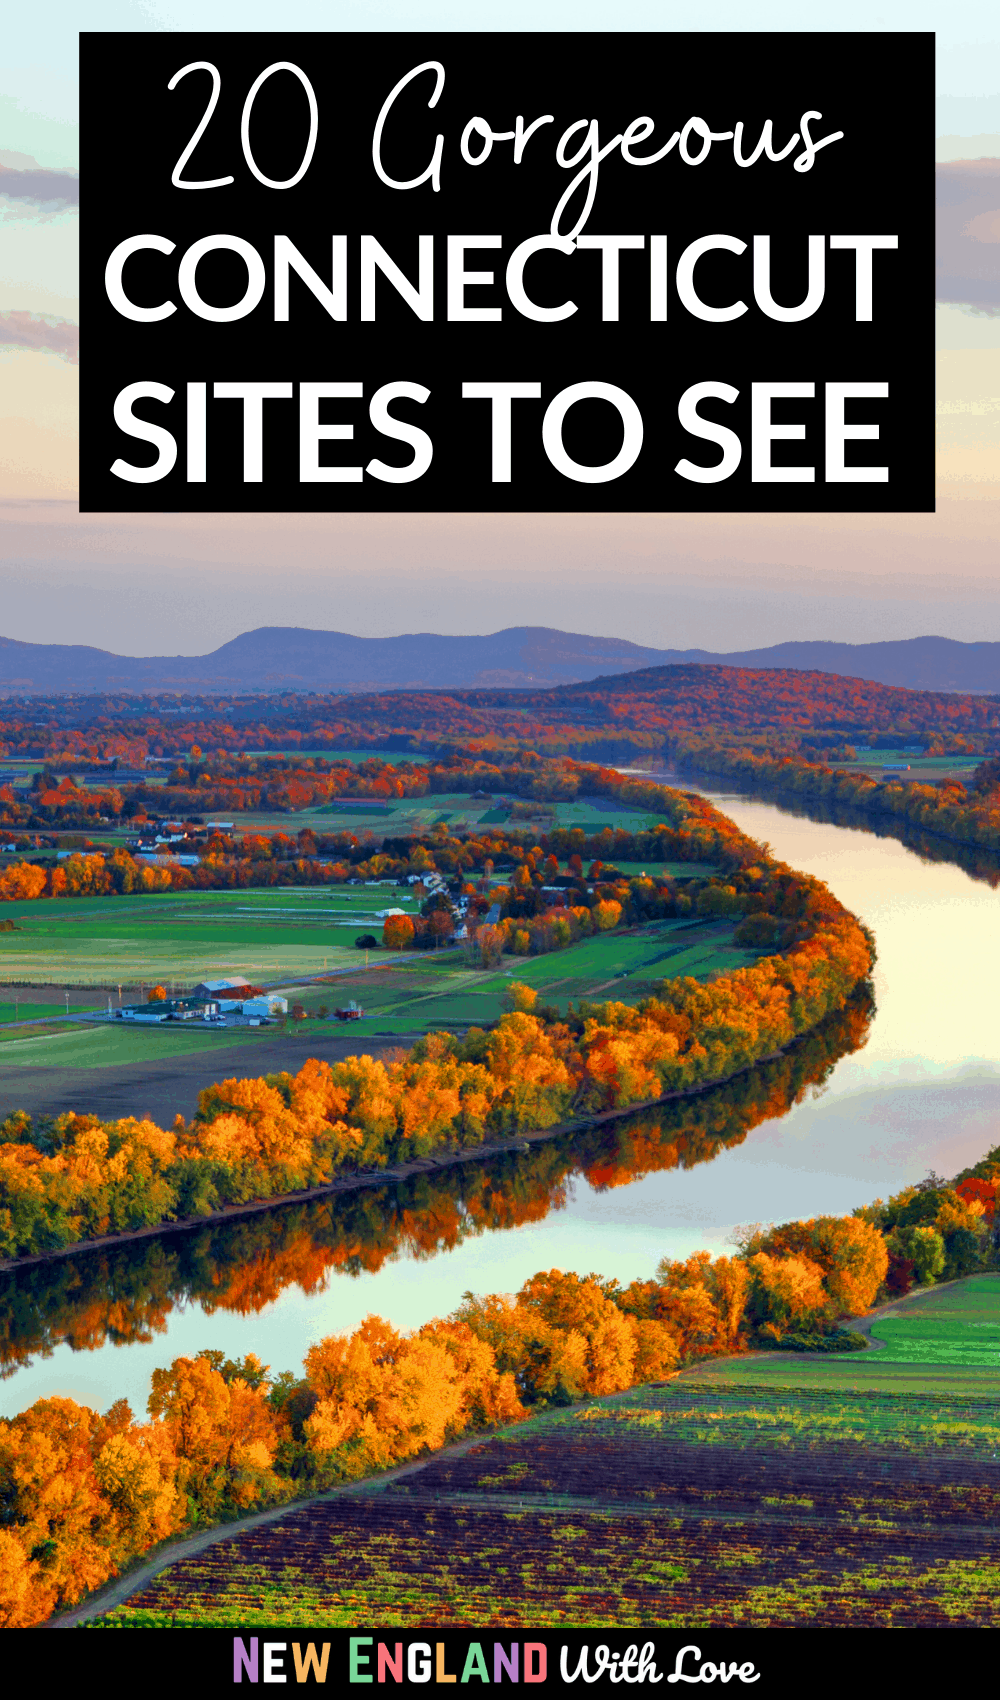 Pinterest graphic reading "20 Gorgeous Connecticut Sites to See"